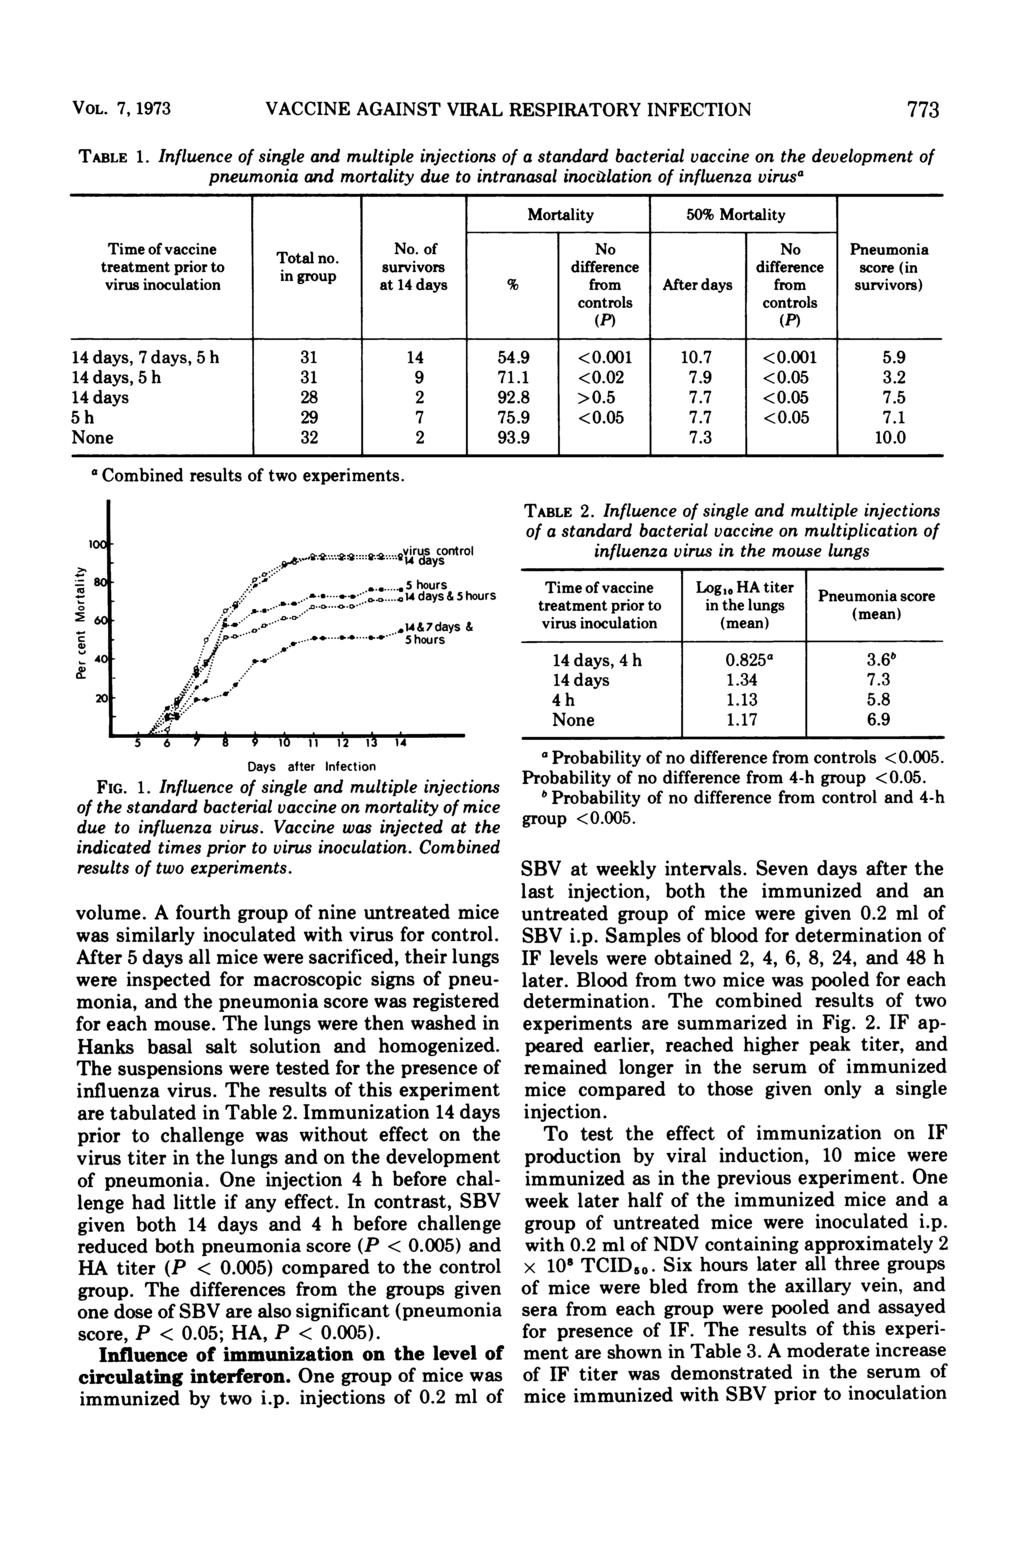 VOL. 7, 1973 VACCINE AGAINST VIRAL RESPIRATORY INFECTION 773 TABLE 1.